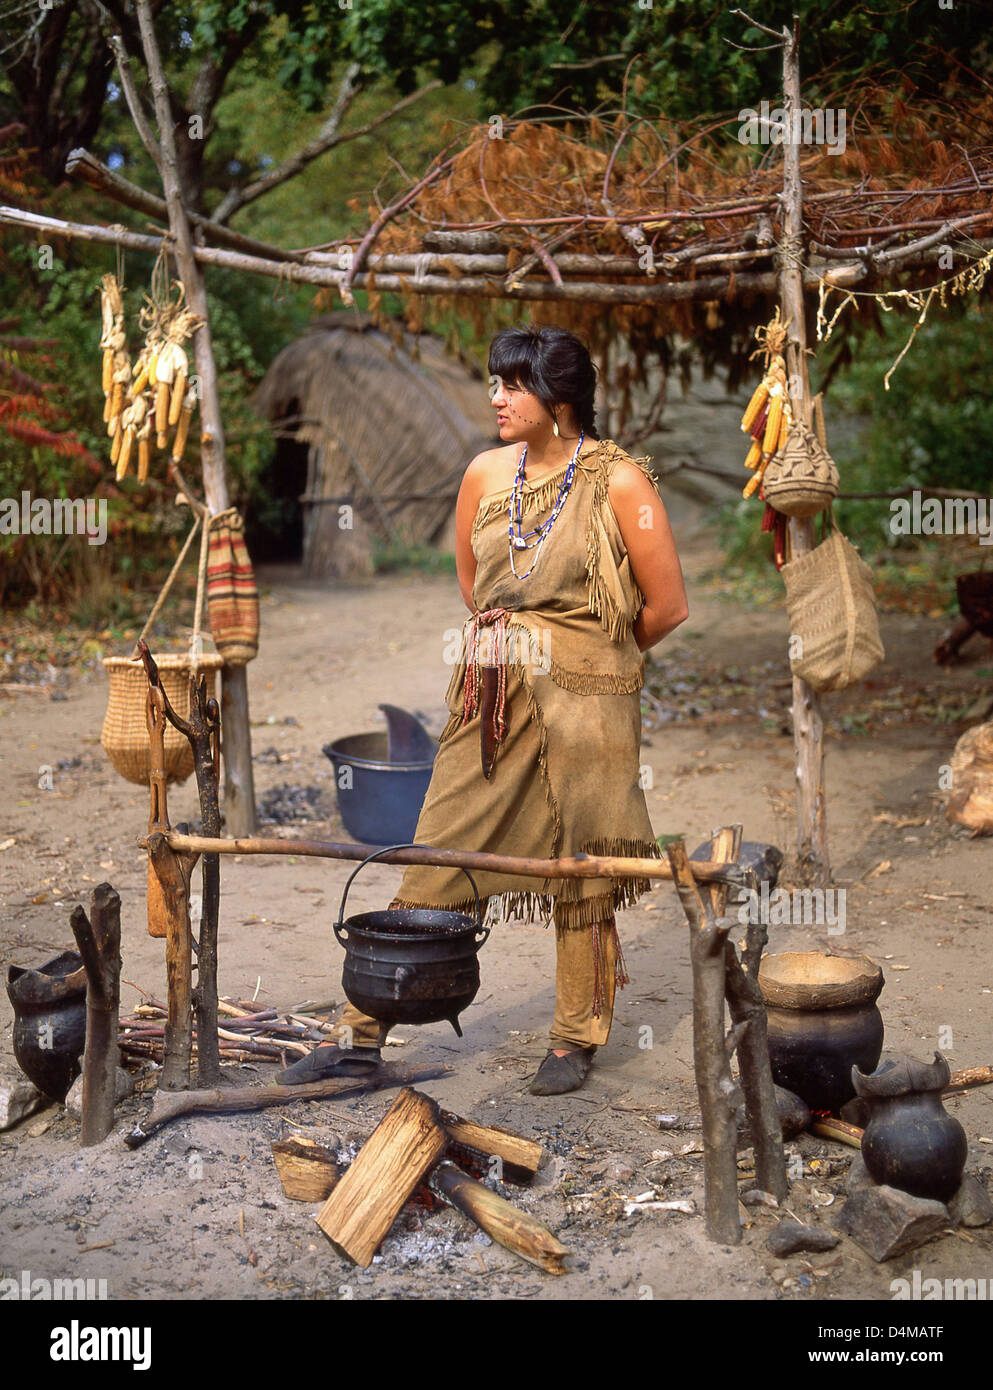 Native Wampanoag man in traditional dress at Plimoth Plantation, Plymouth, Massachusetts, United States of America Stock Photo